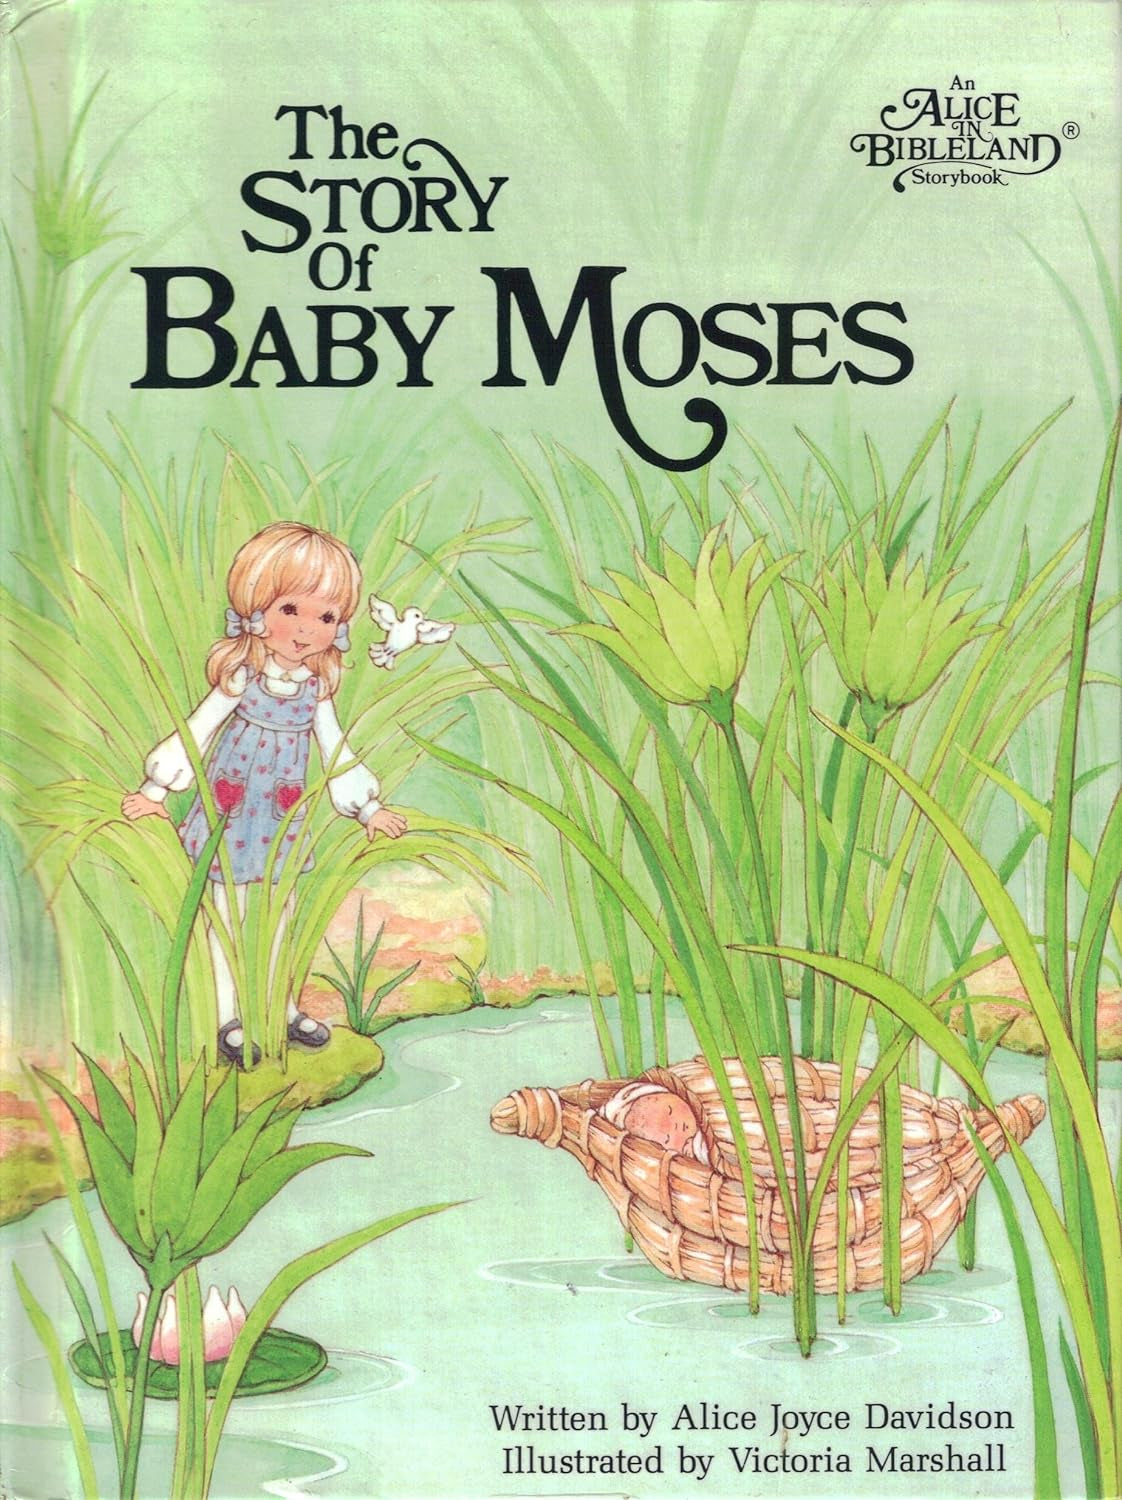 The Story of Baby Moses (An Alice in Bibleland Storybook)